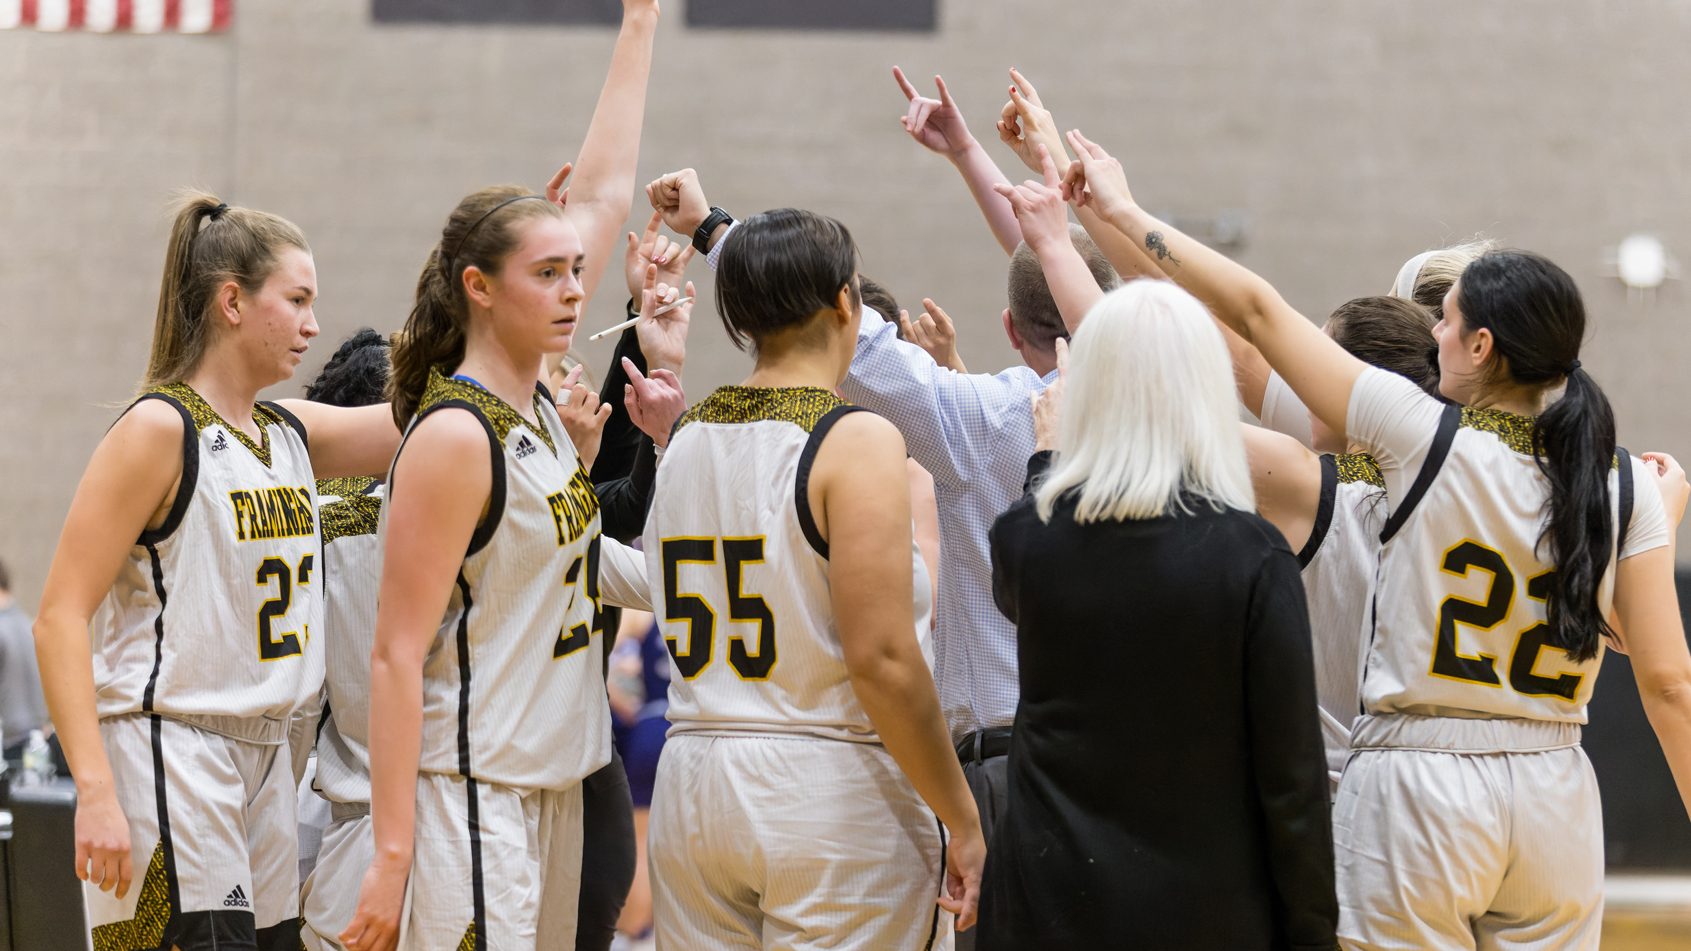 Women’s Basketball Earns #2 Seed in MASCAC Tournament; Will Host Semifinal on Thursday